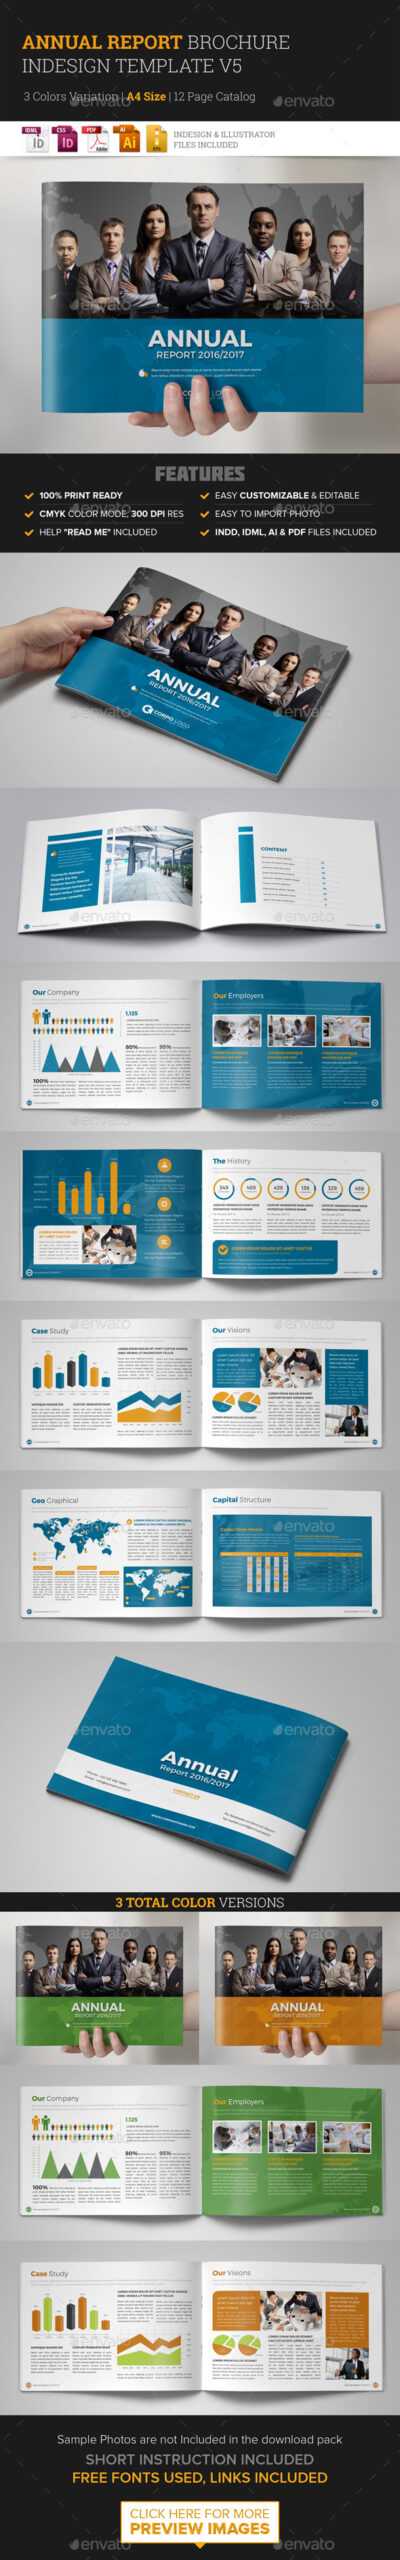 Annual Report Template Indesign Graphics, Designs & Templates Within Free Annual Report Template Indesign